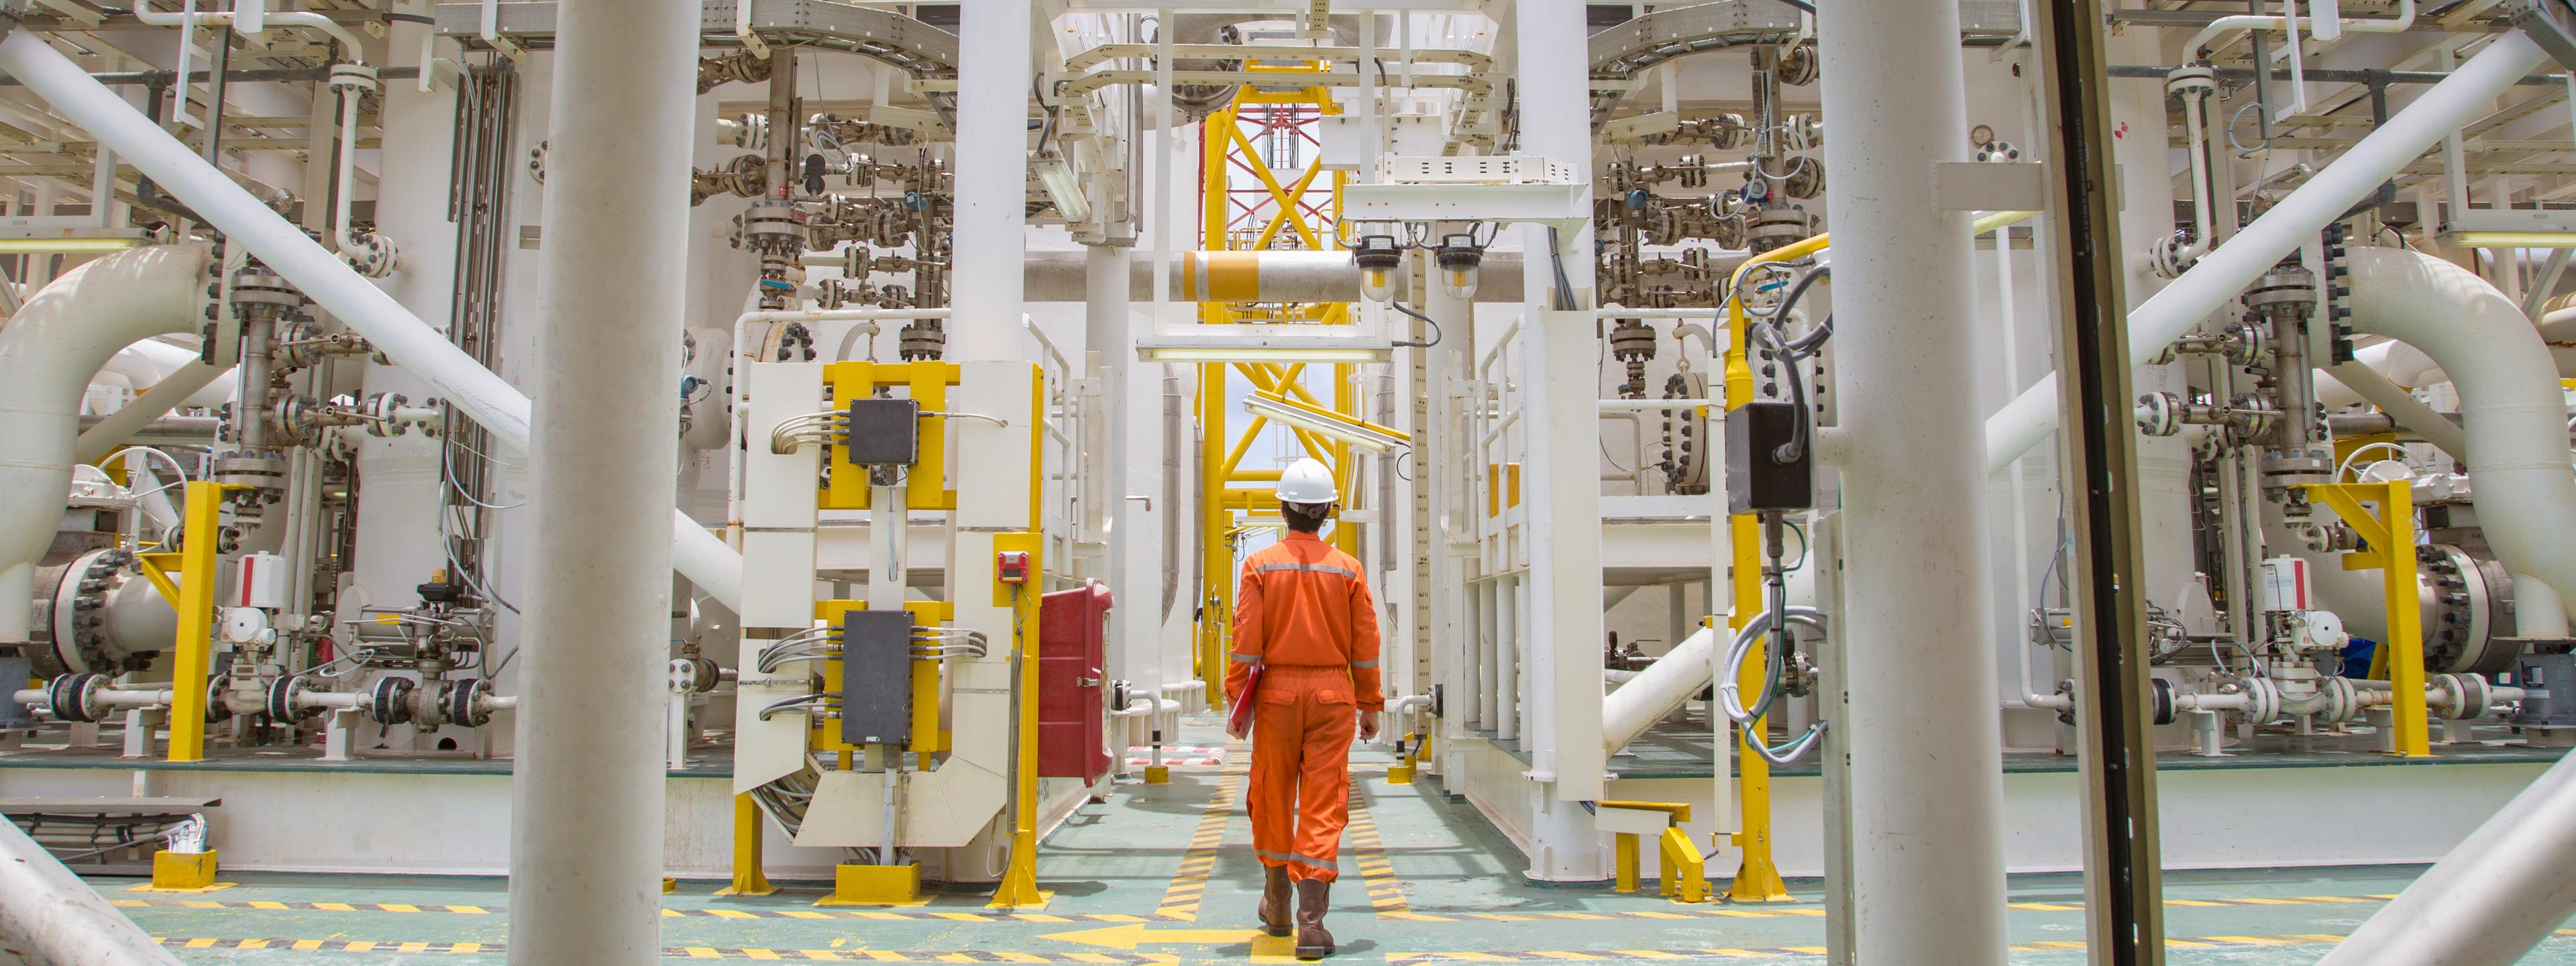 Technician walking through offshore oil and gas process for checking the condition of equipment on platform.